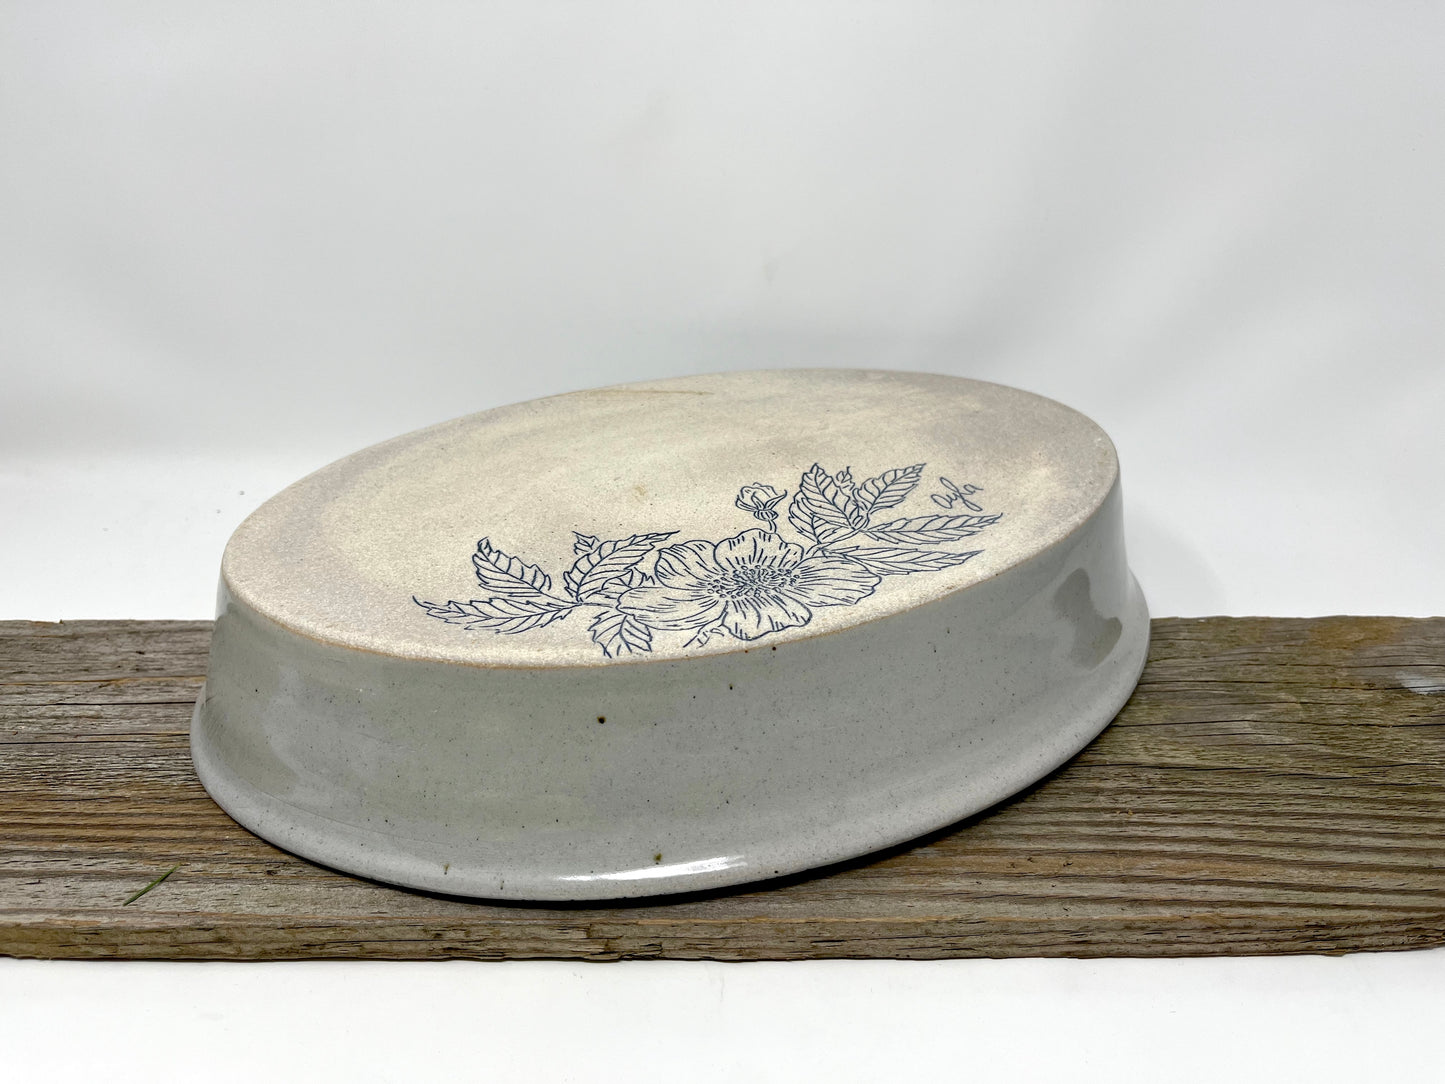 PICK OF THE KILN: Oval Serving Dish with Wild Roses